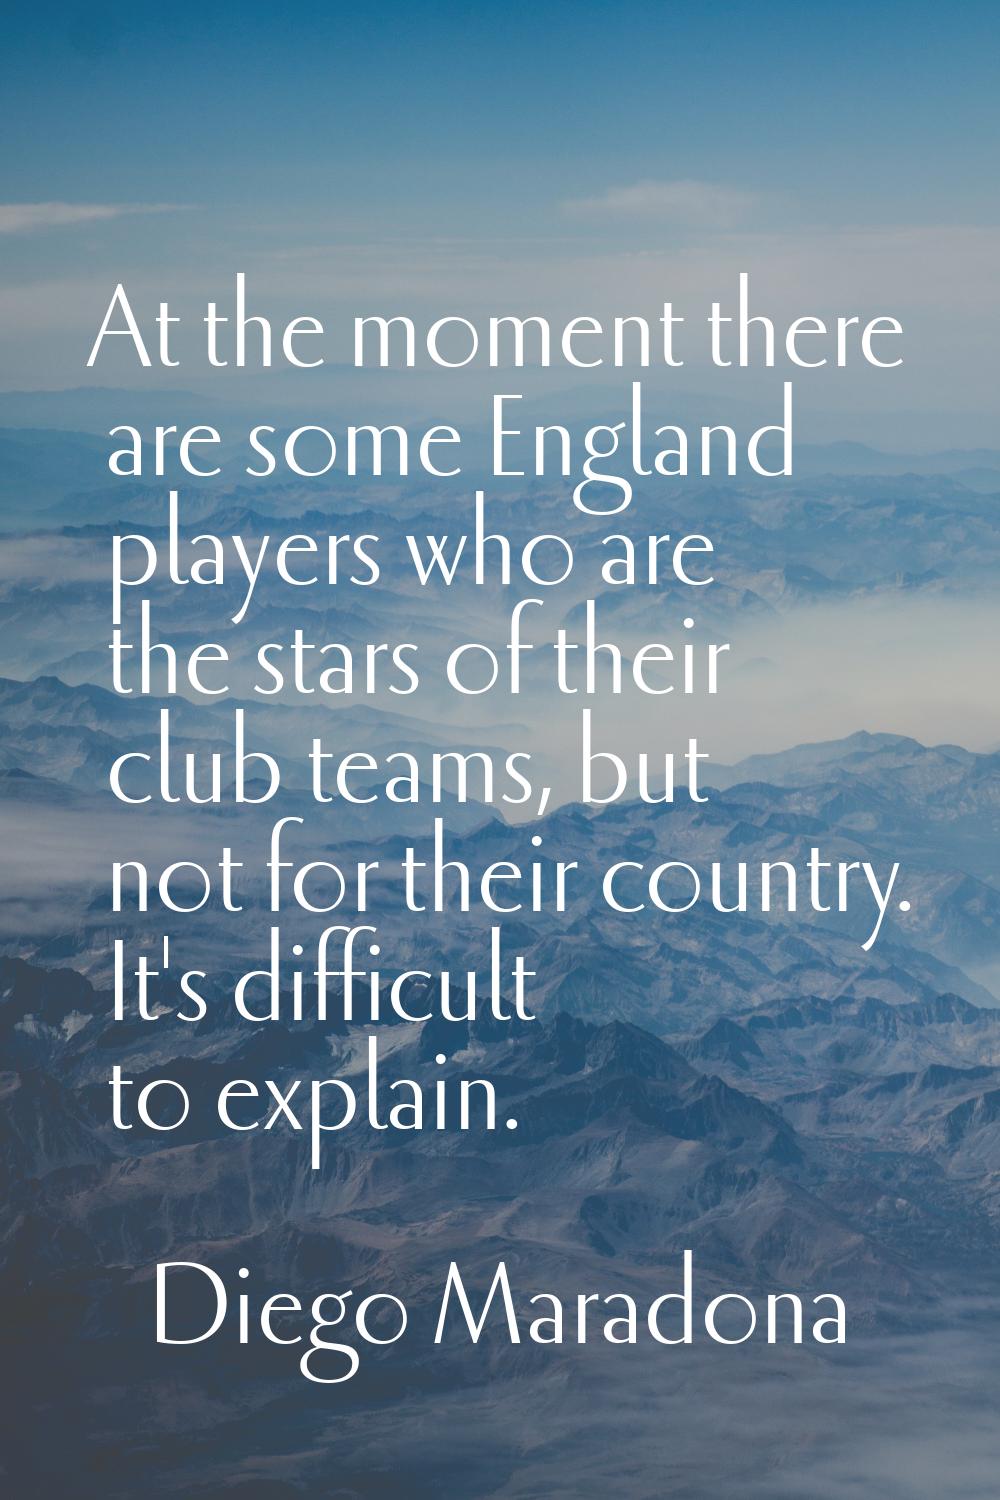 At the moment there are some England players who are the stars of their club teams, but not for the